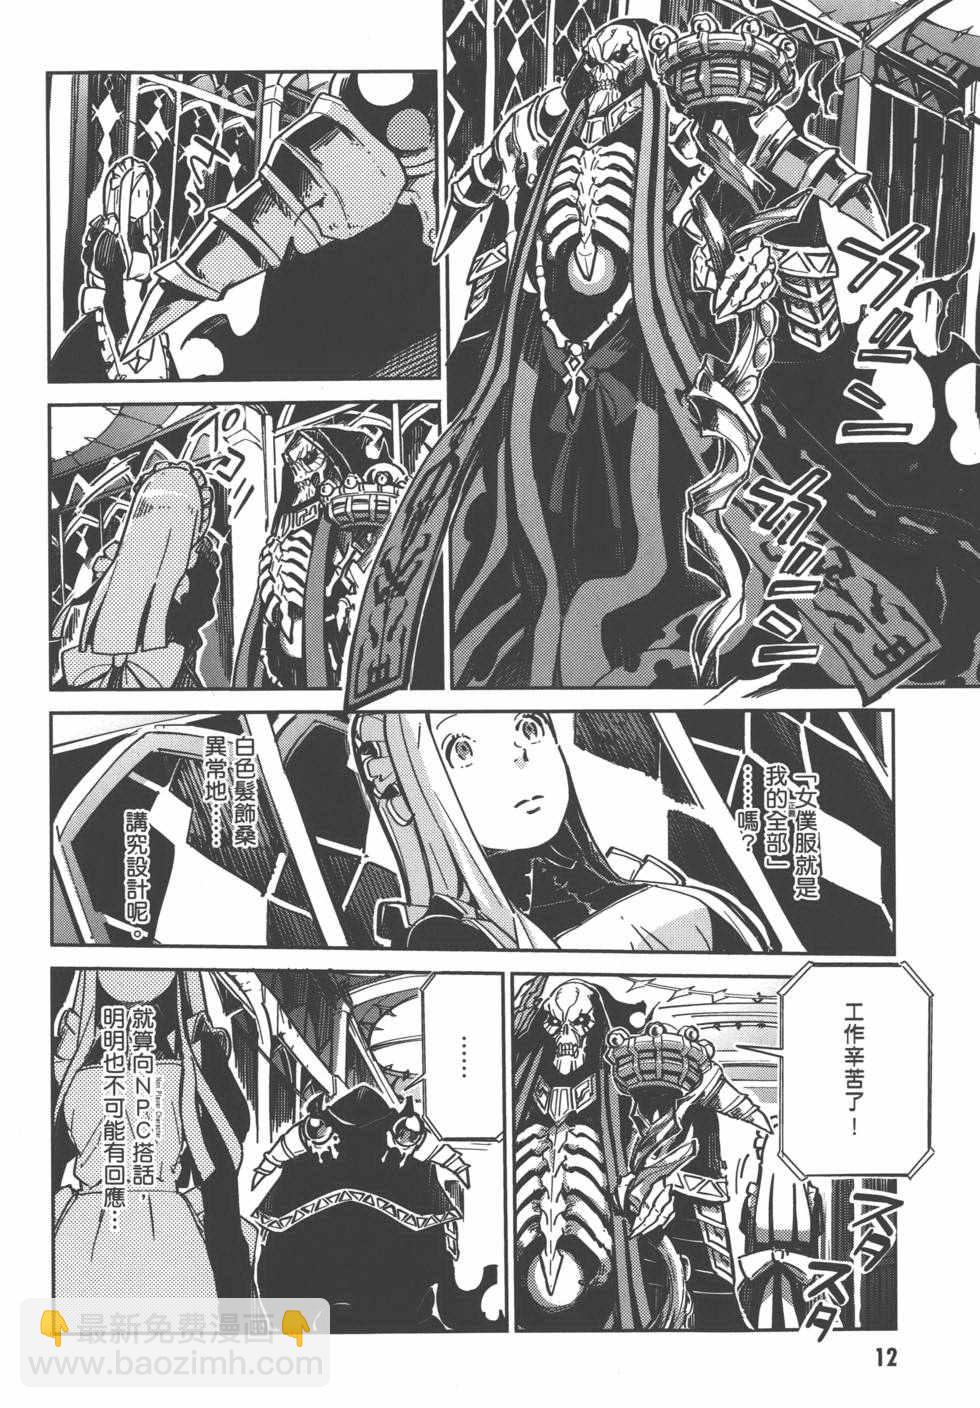 OVERLORD - 第1卷(1/4) - 6